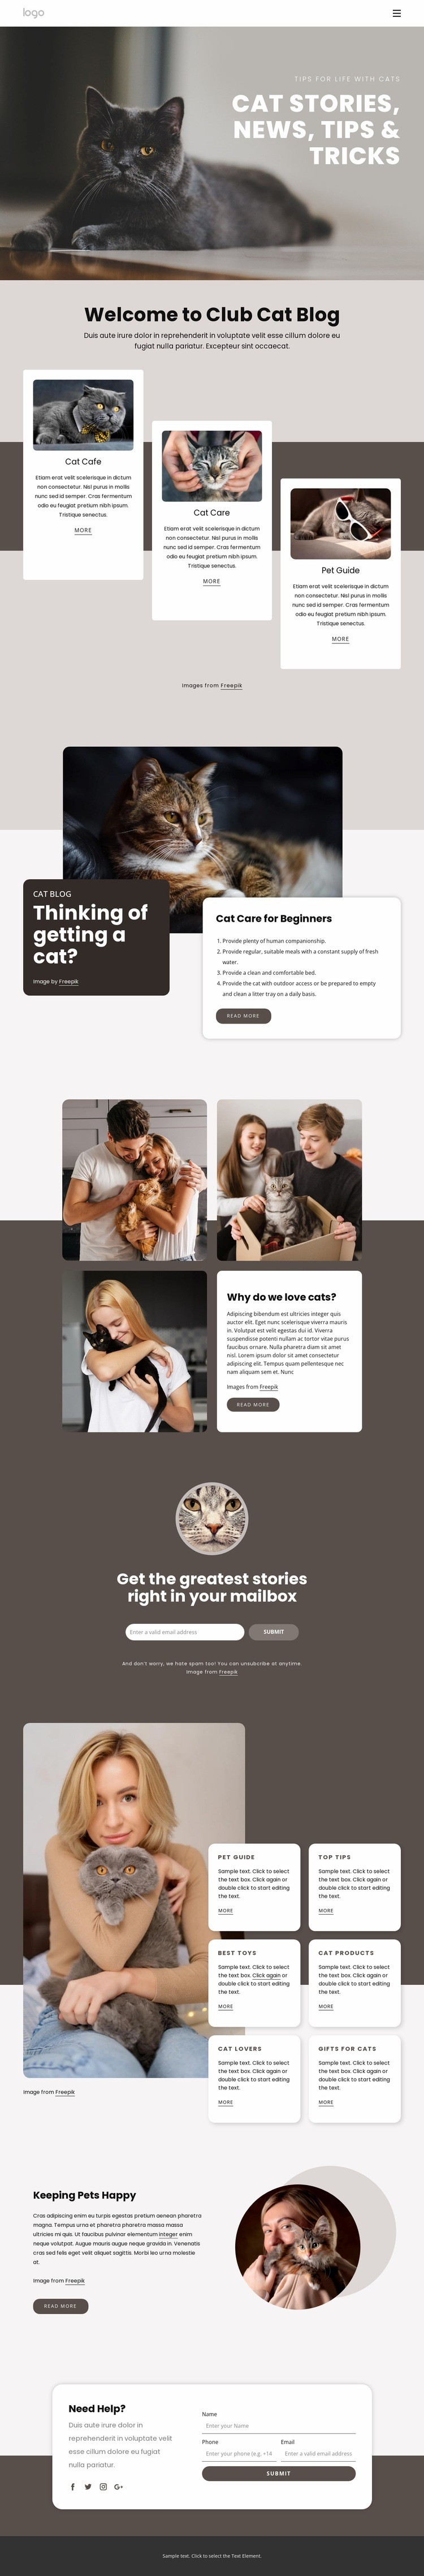 Cat stories, tips and tricks Squarespace Template Alternative